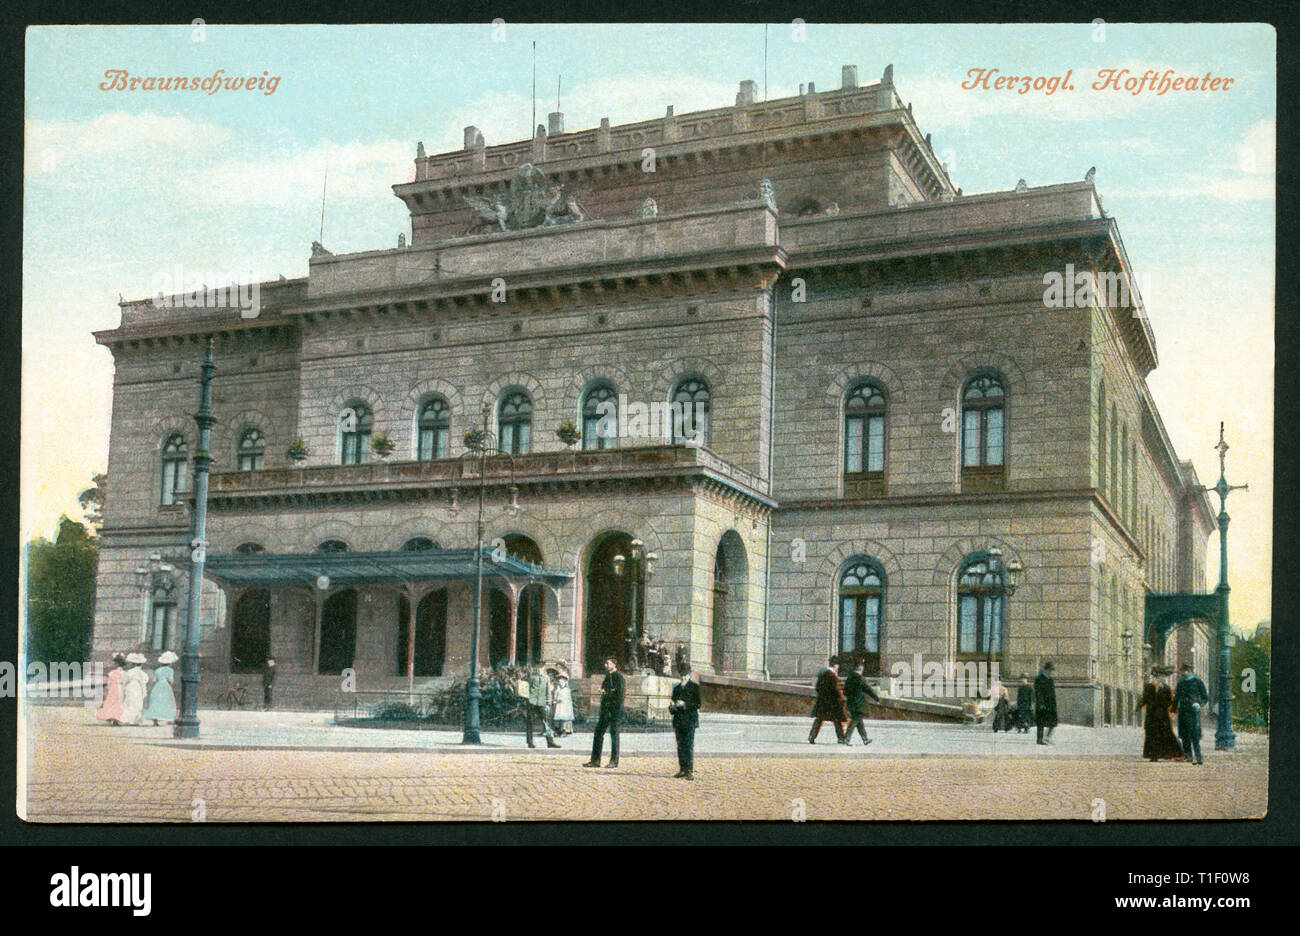 Germany, Lower Saxony, Braunschweig, Brunswick, ducal theatre, postcard, sent 1910., Additional-Rights-Clearance-Info-Not-Available Stock Photo